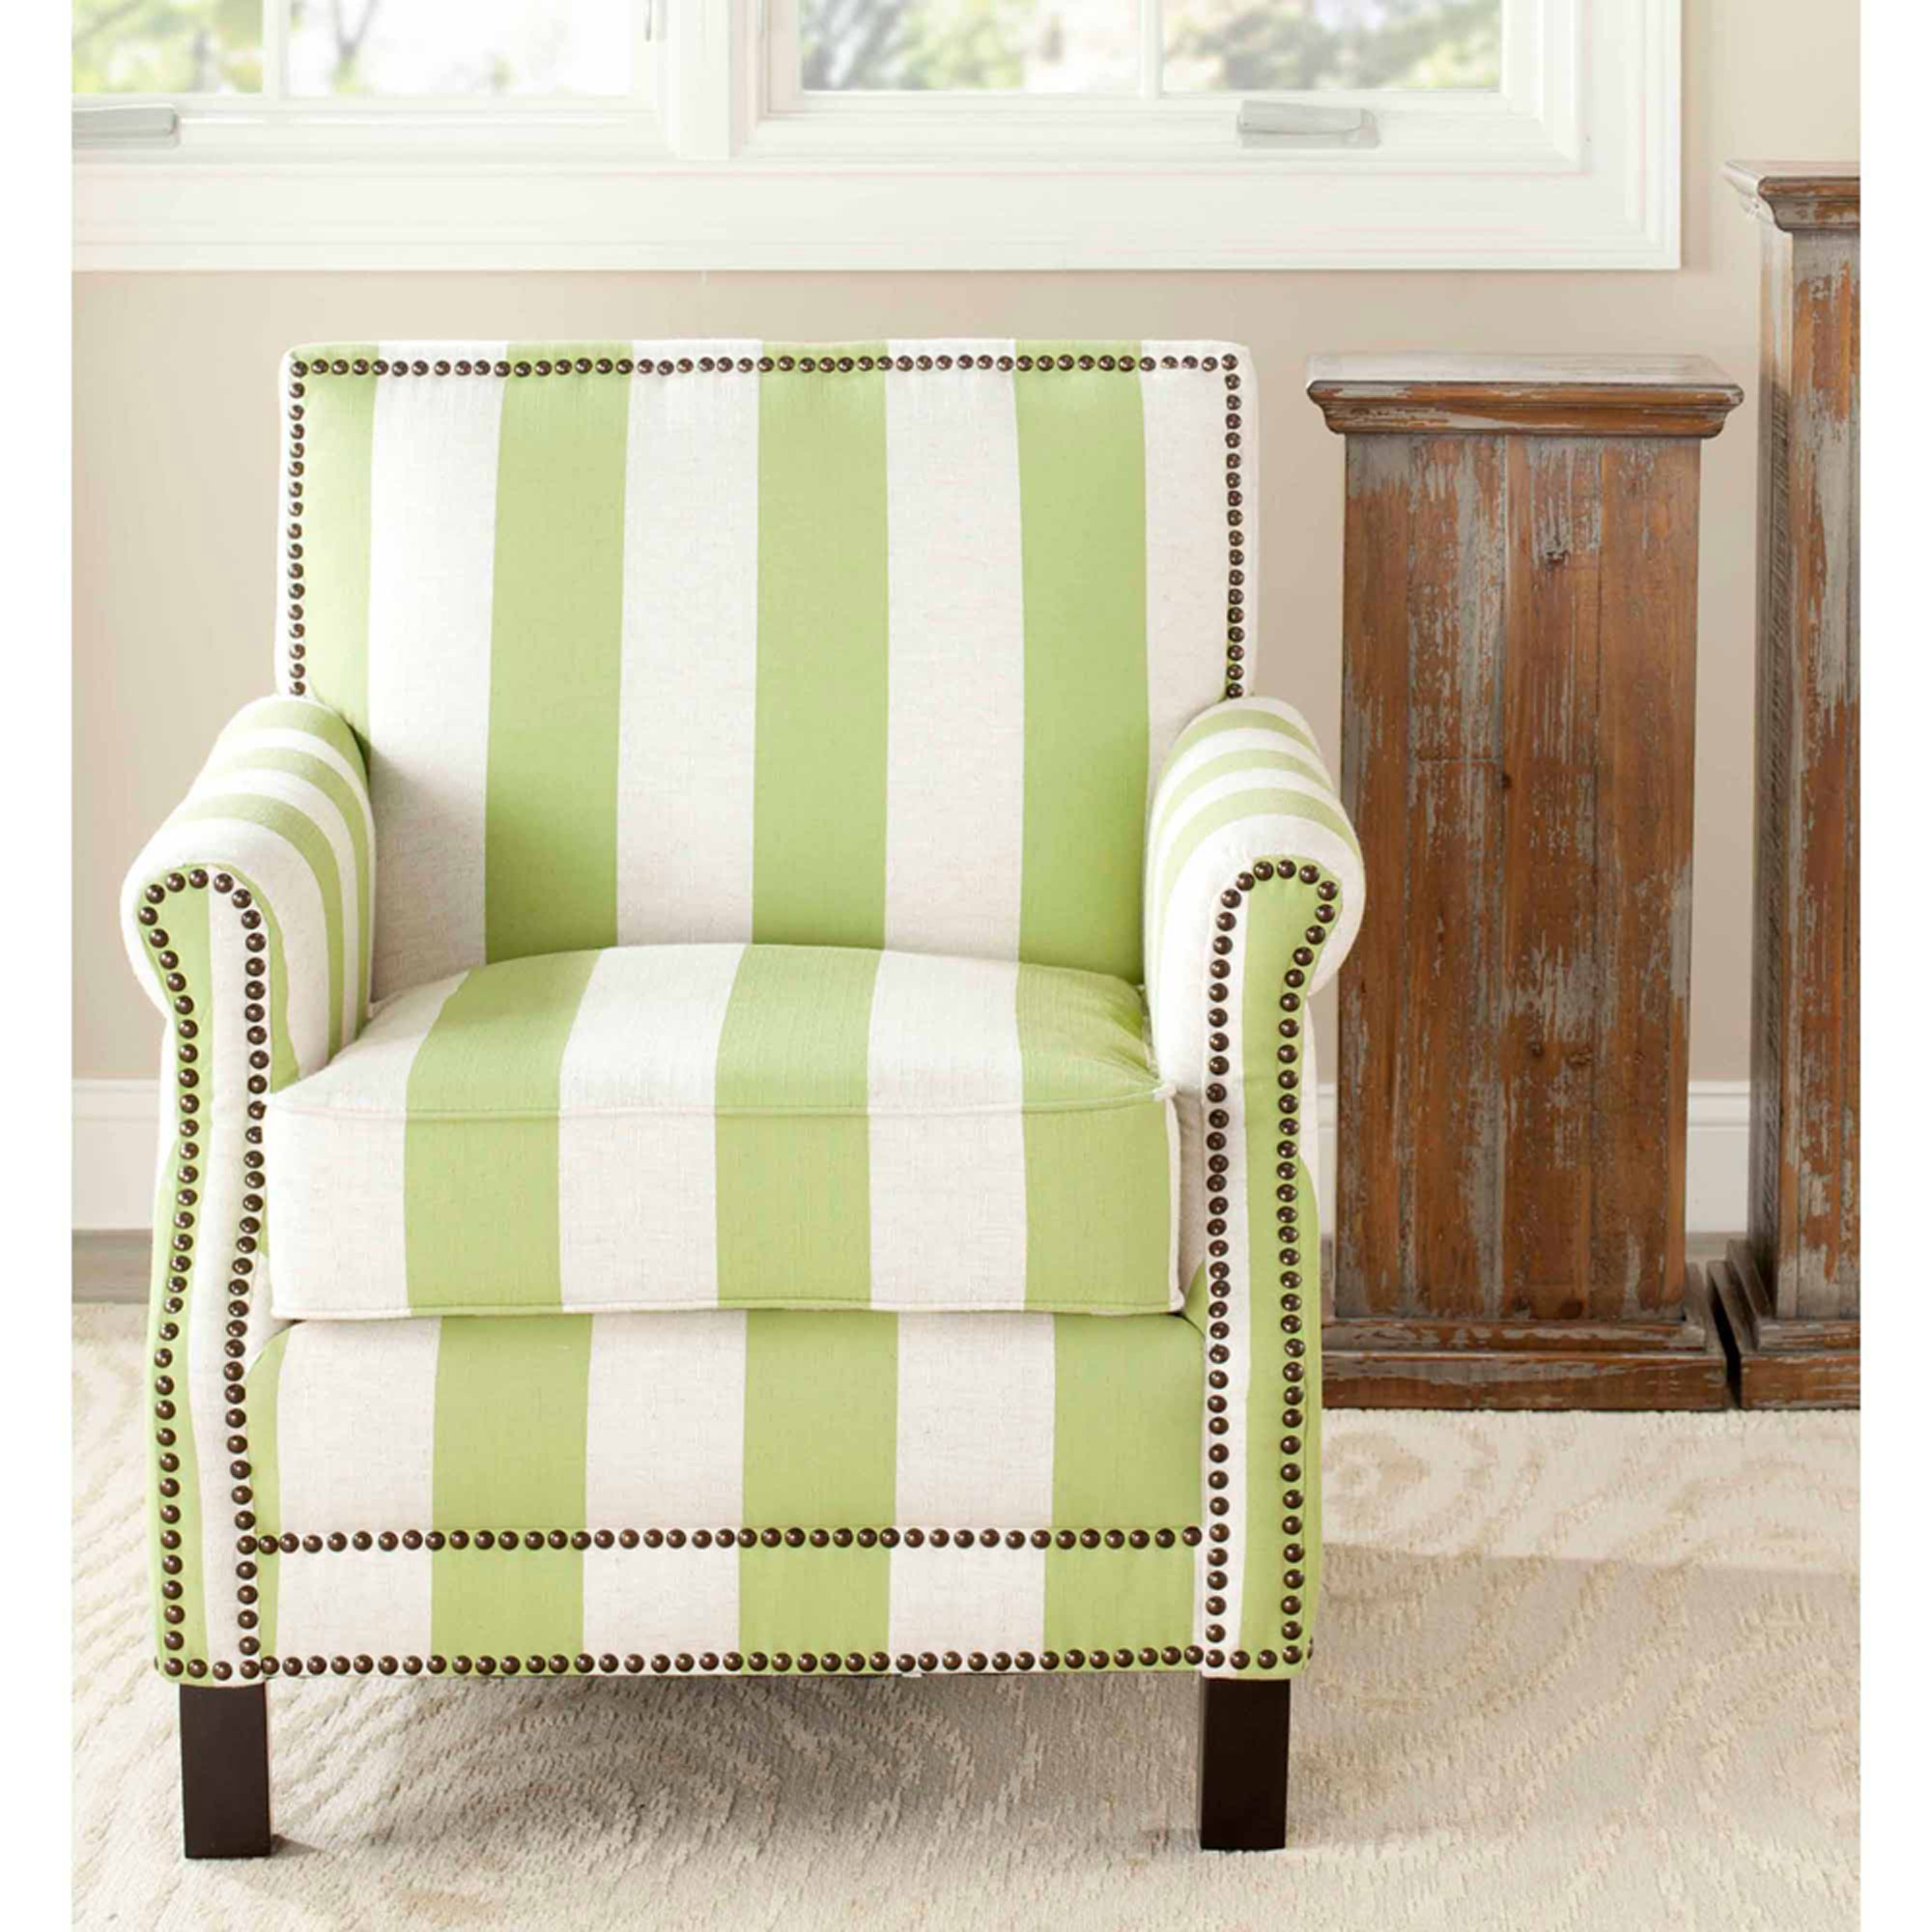 SAFAVIEH Easton Rustic Glam Upholstered Club Chair w/ Nailheads, Lime Green/White - image 1 of 4